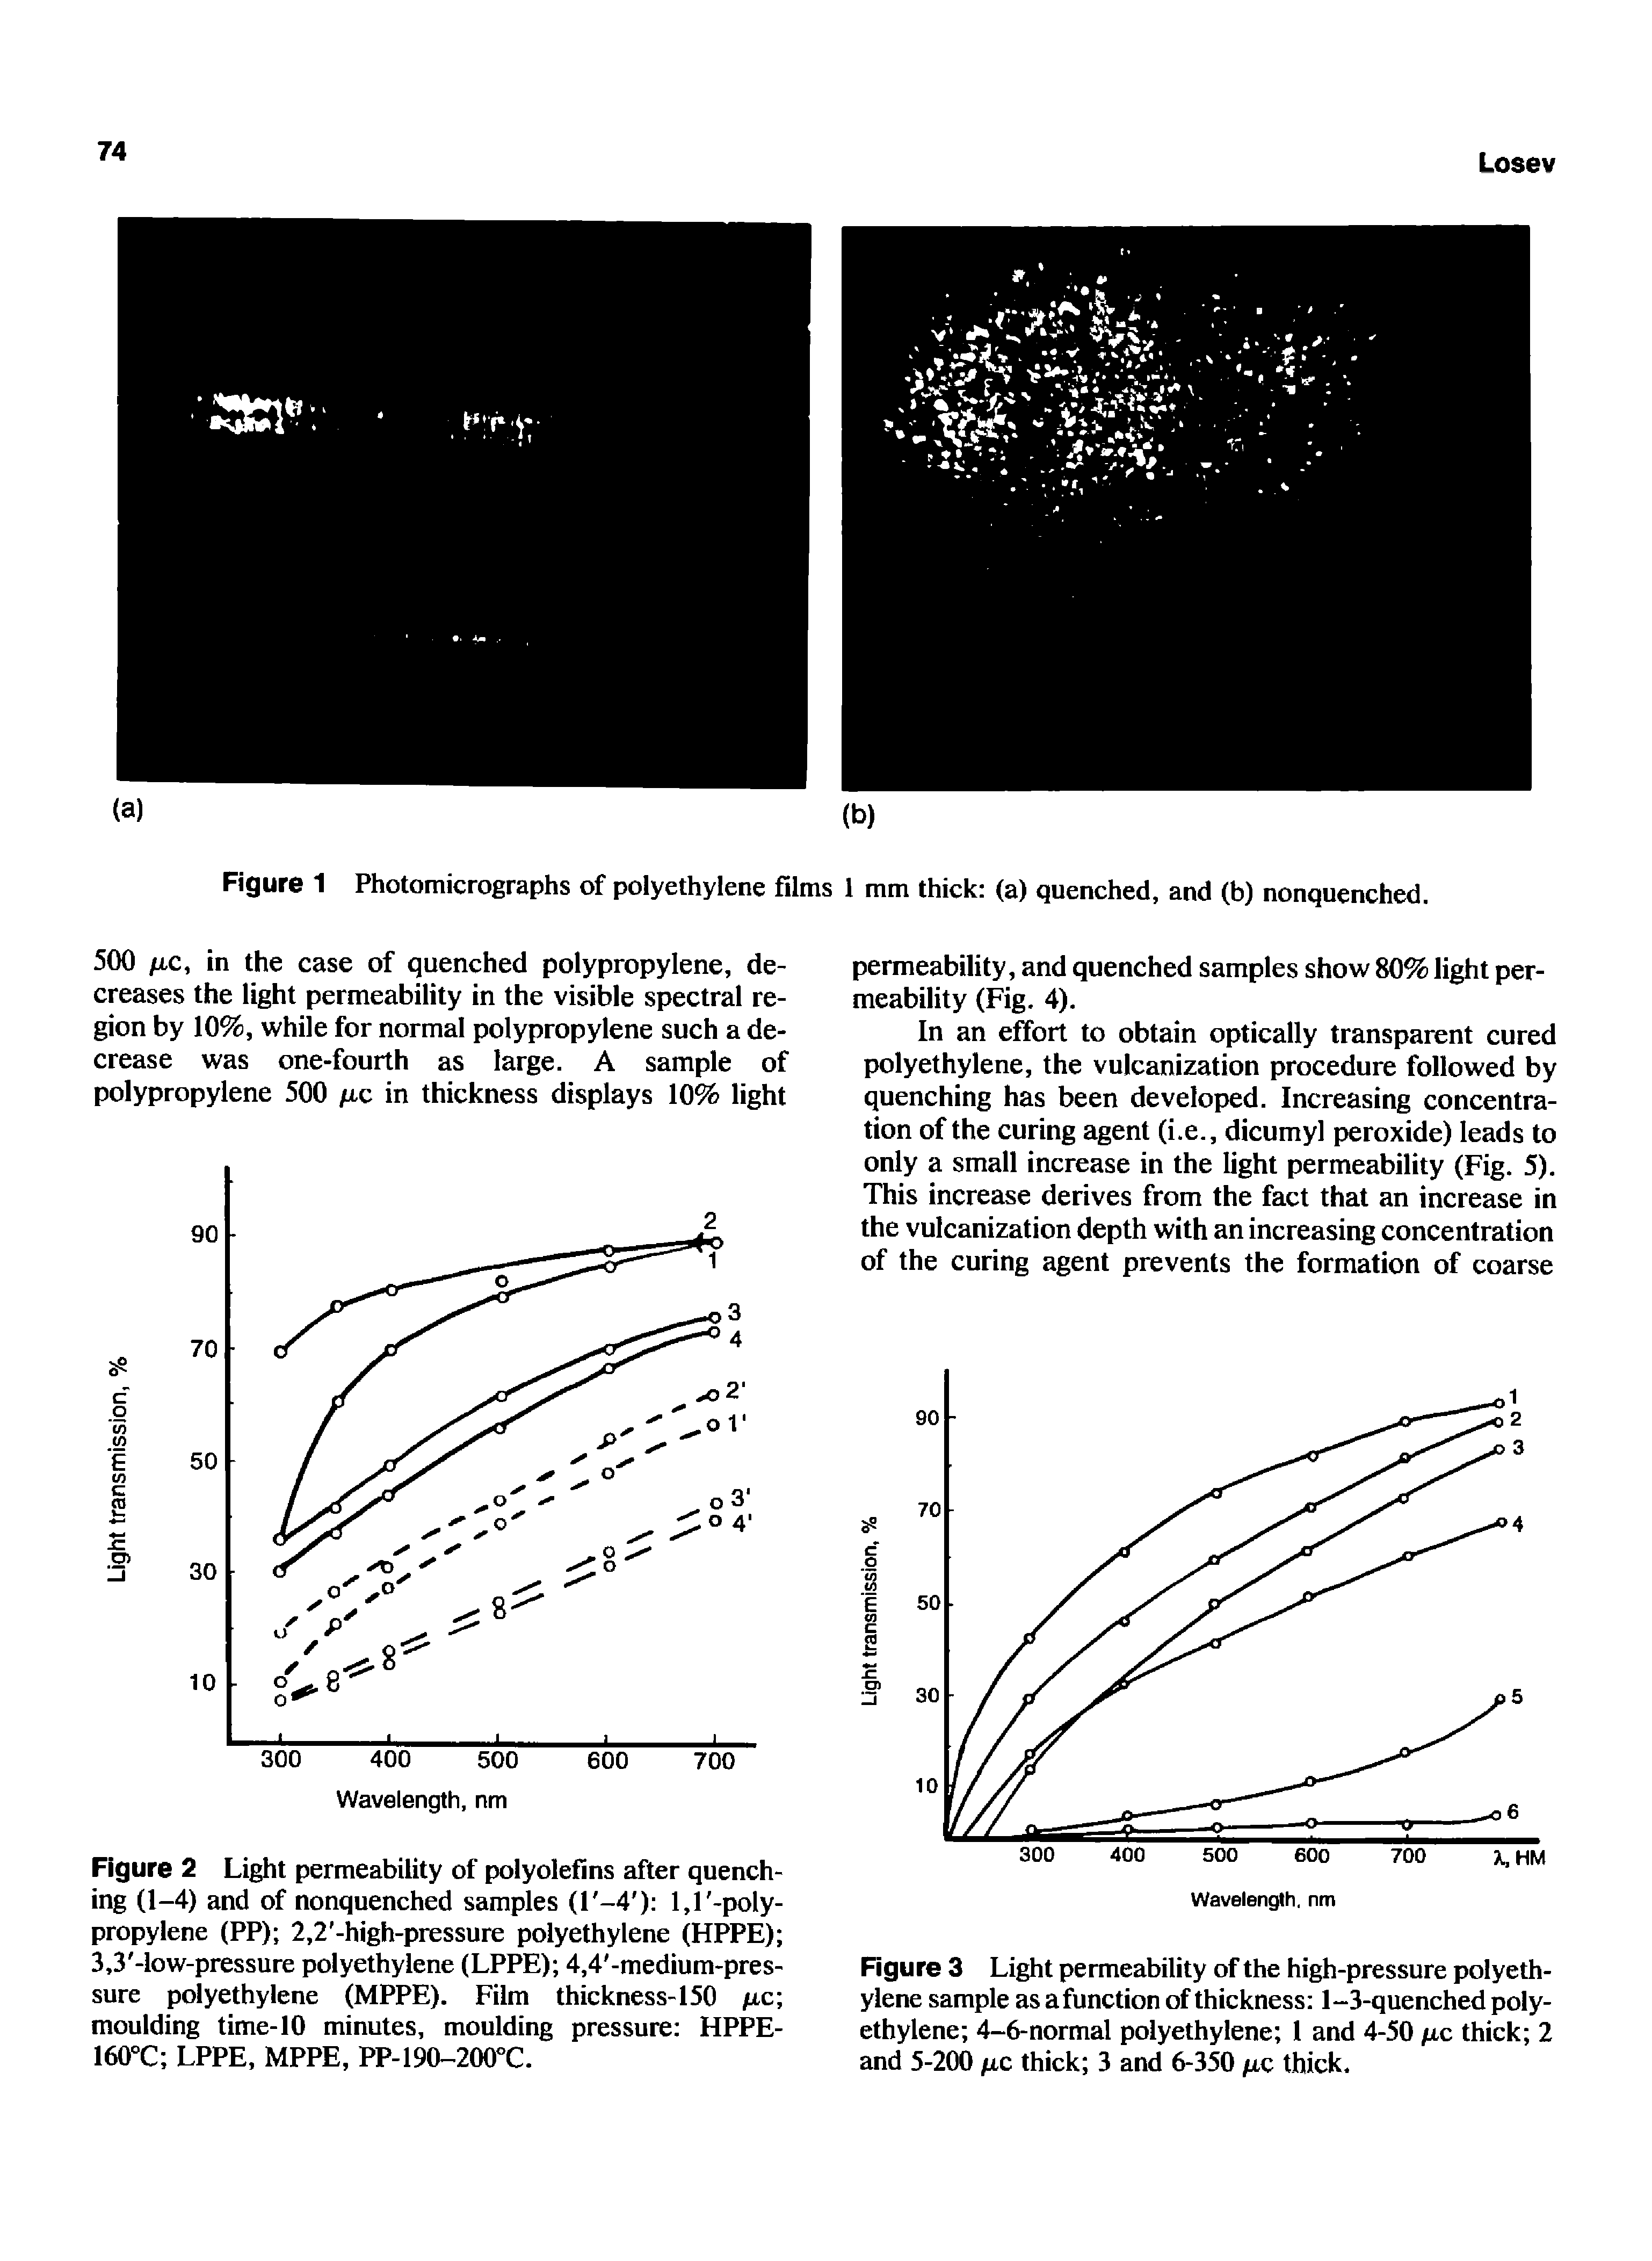 Figure 1 Photomicrographs of polyethylene films 1 mm thick (a) quenched, and (b) nonquenched.